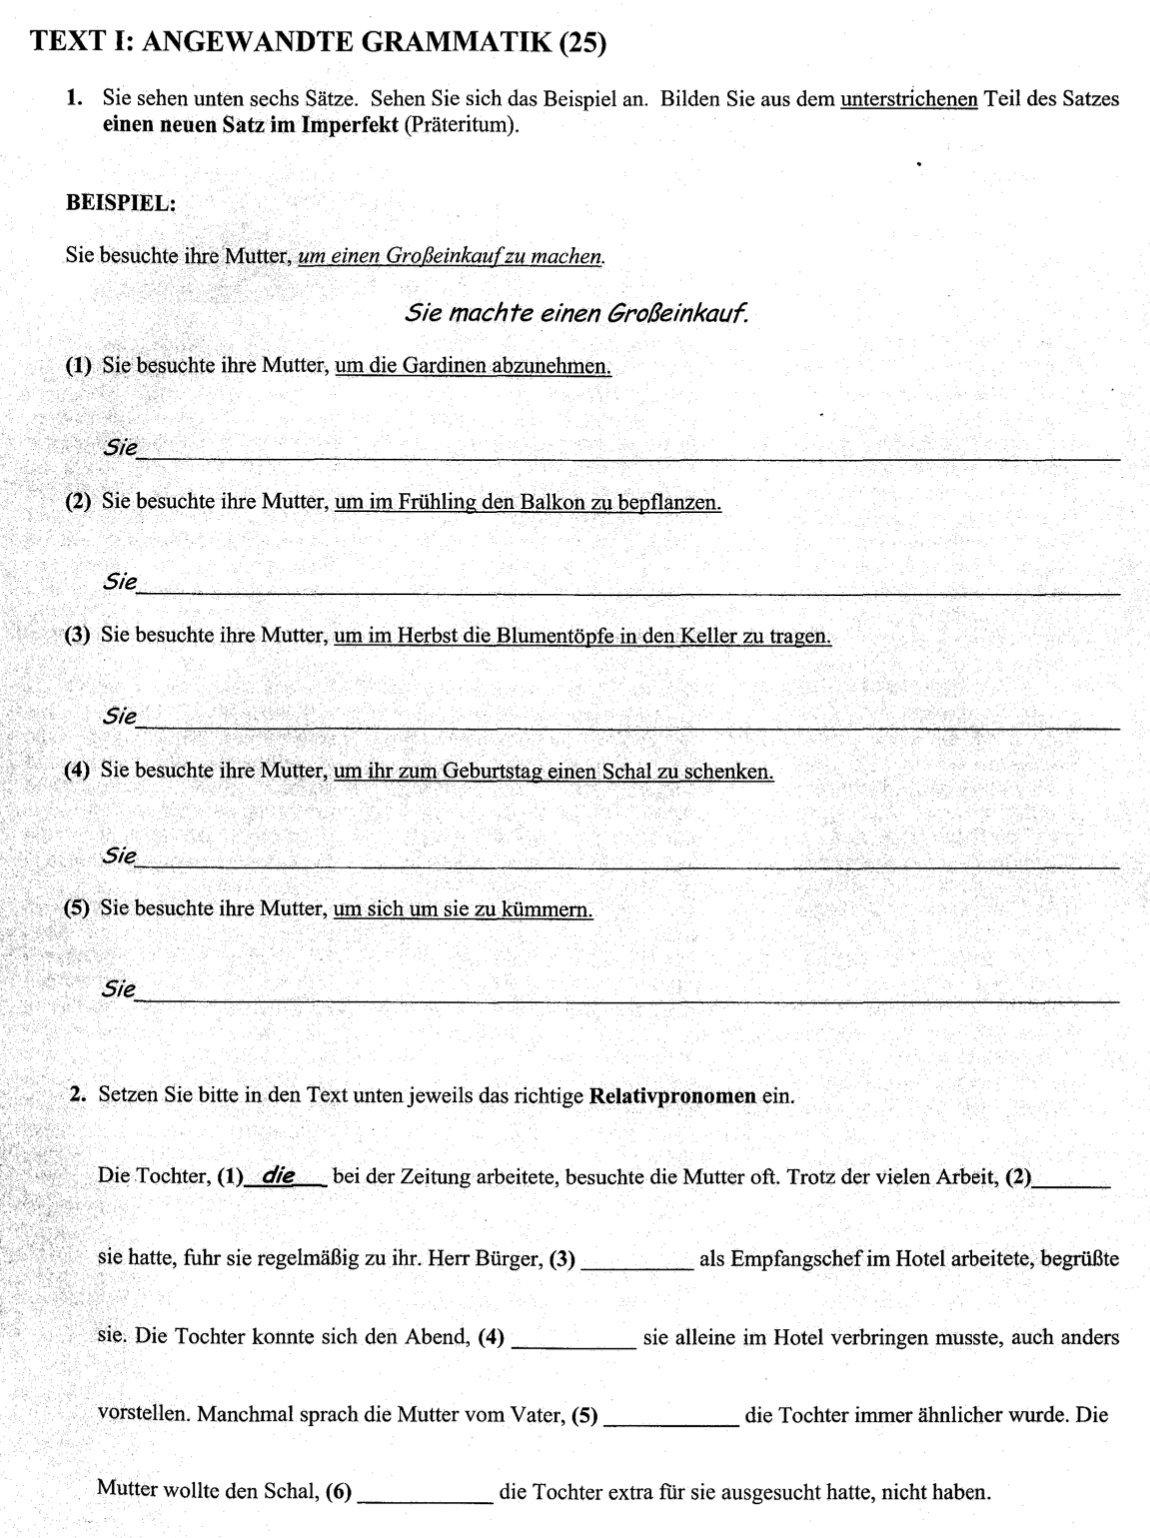 an image of the question 2004 Text I Angewandte Grammatik which is about the topic grammatik and the subject is Leaving Certificate german